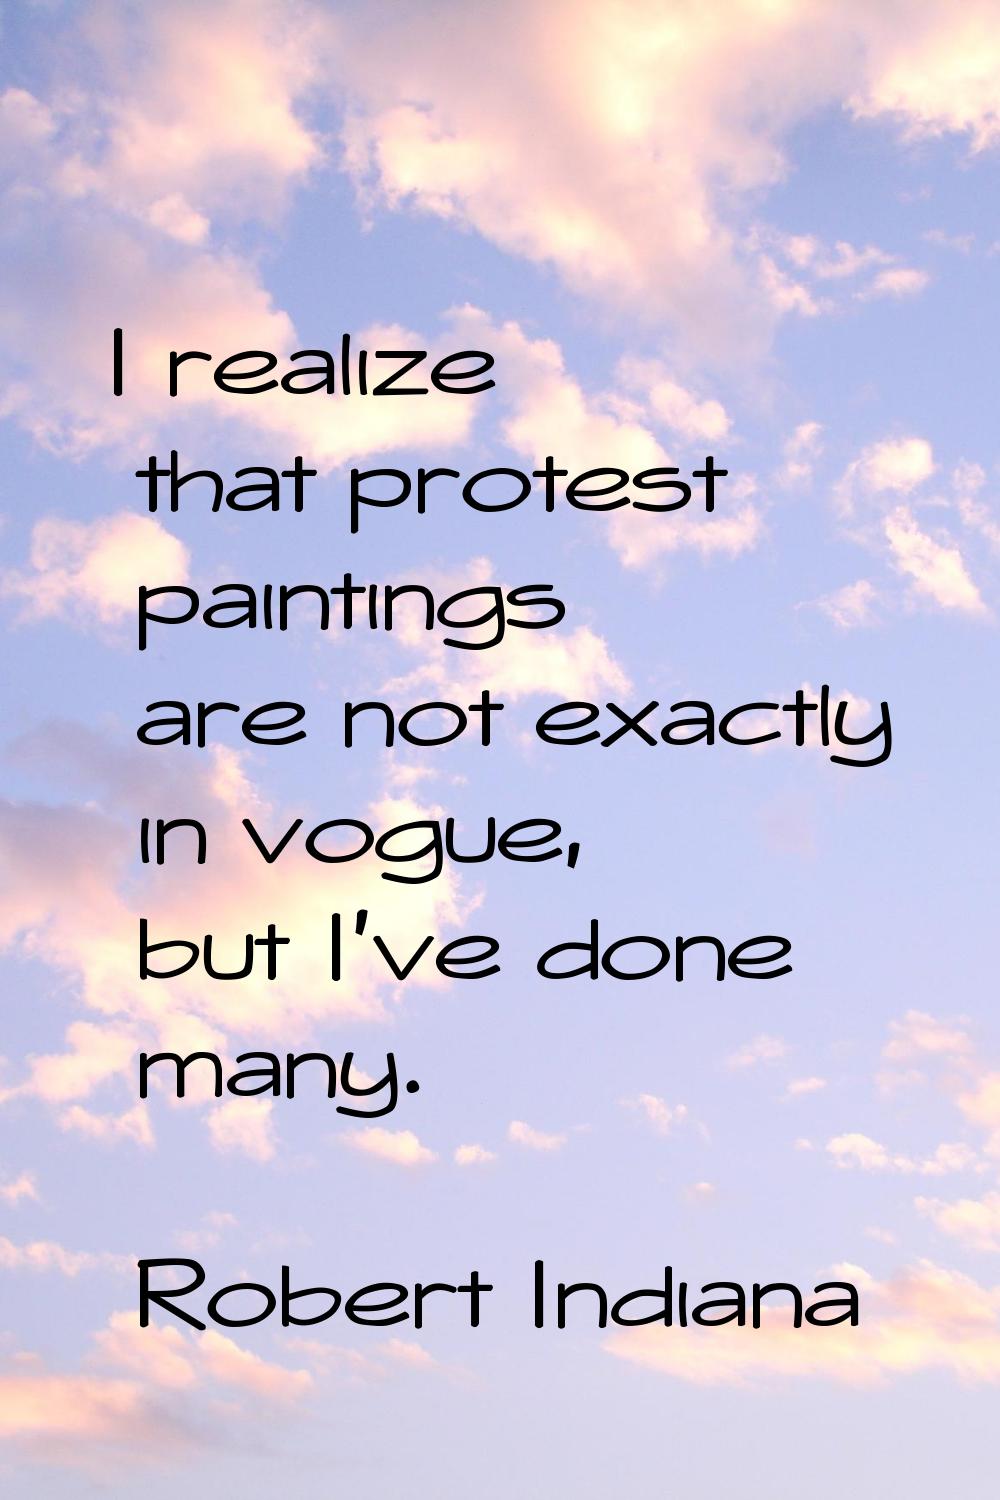 I realize that protest paintings are not exactly in vogue, but I've done many.